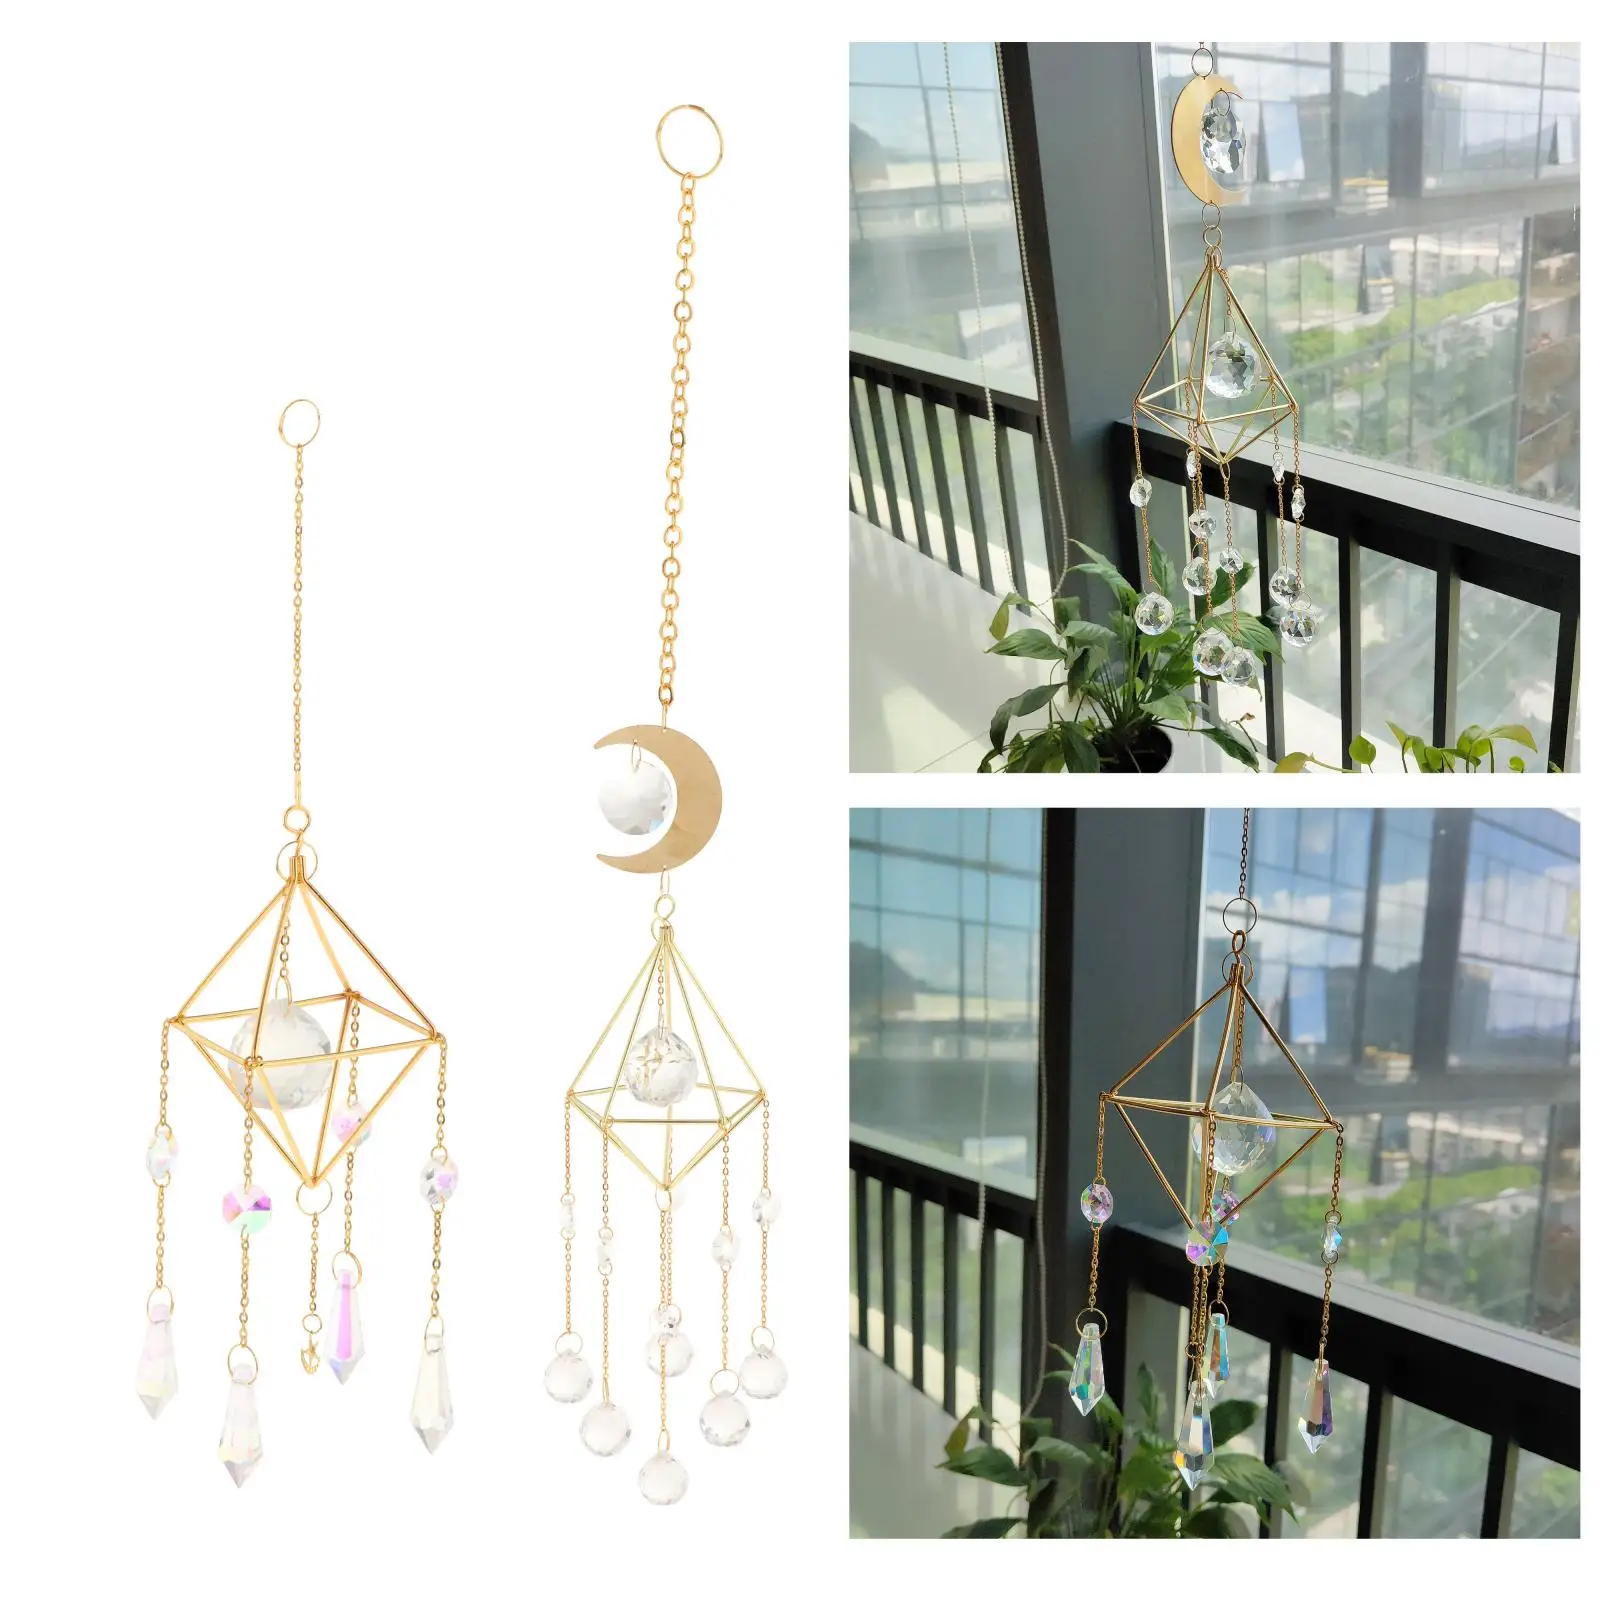 Crystal  Modern Wind Chime Home Hanging Ornament Raindrop Decor